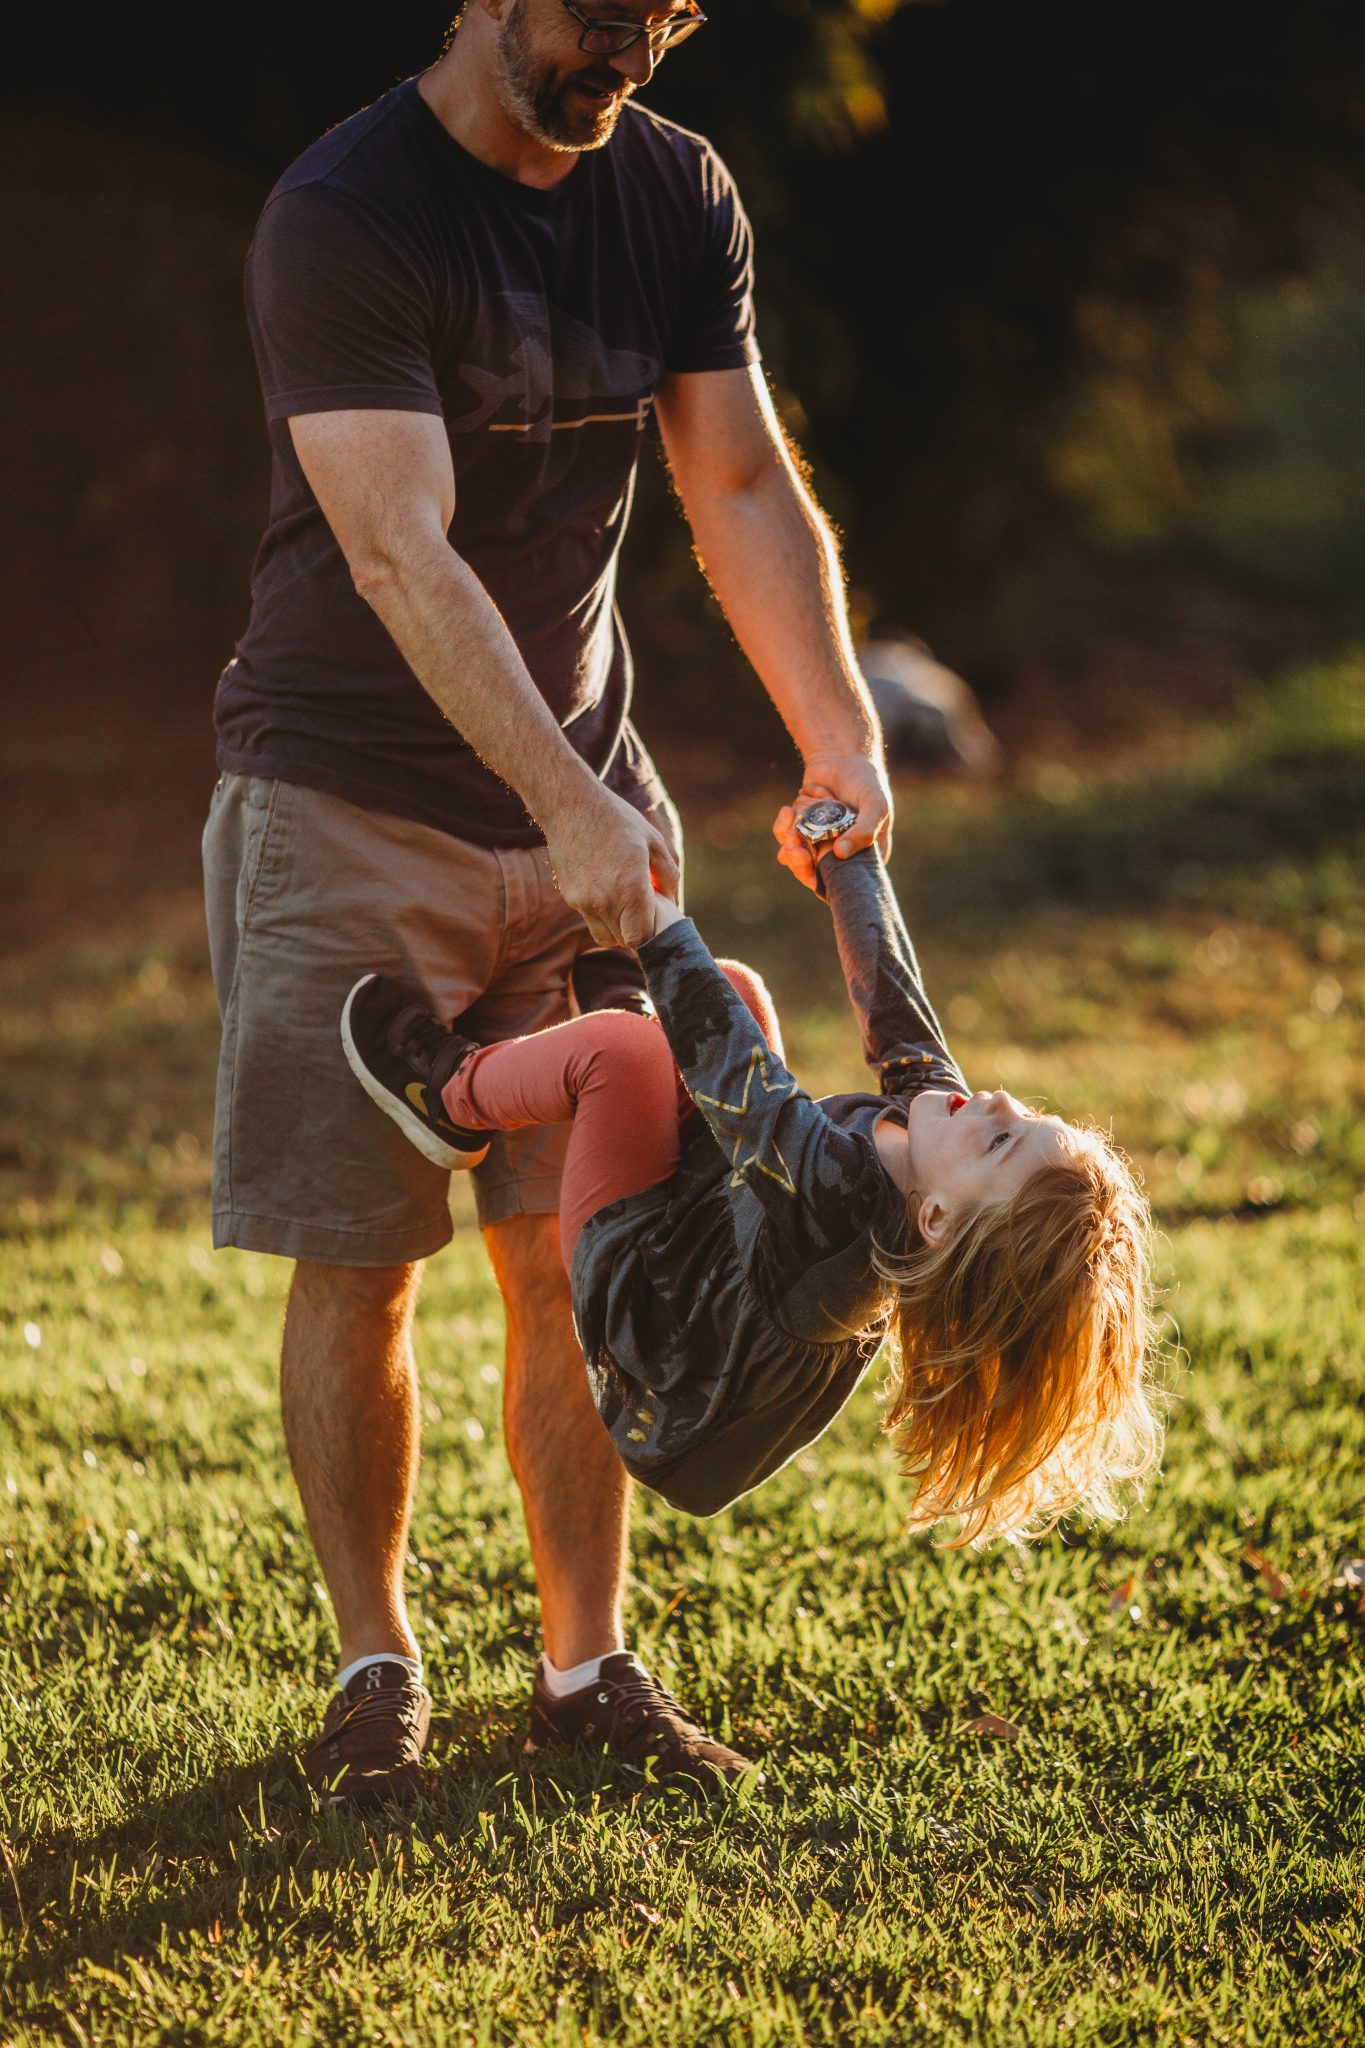 Man flipping his daughter upside down while holding her hands